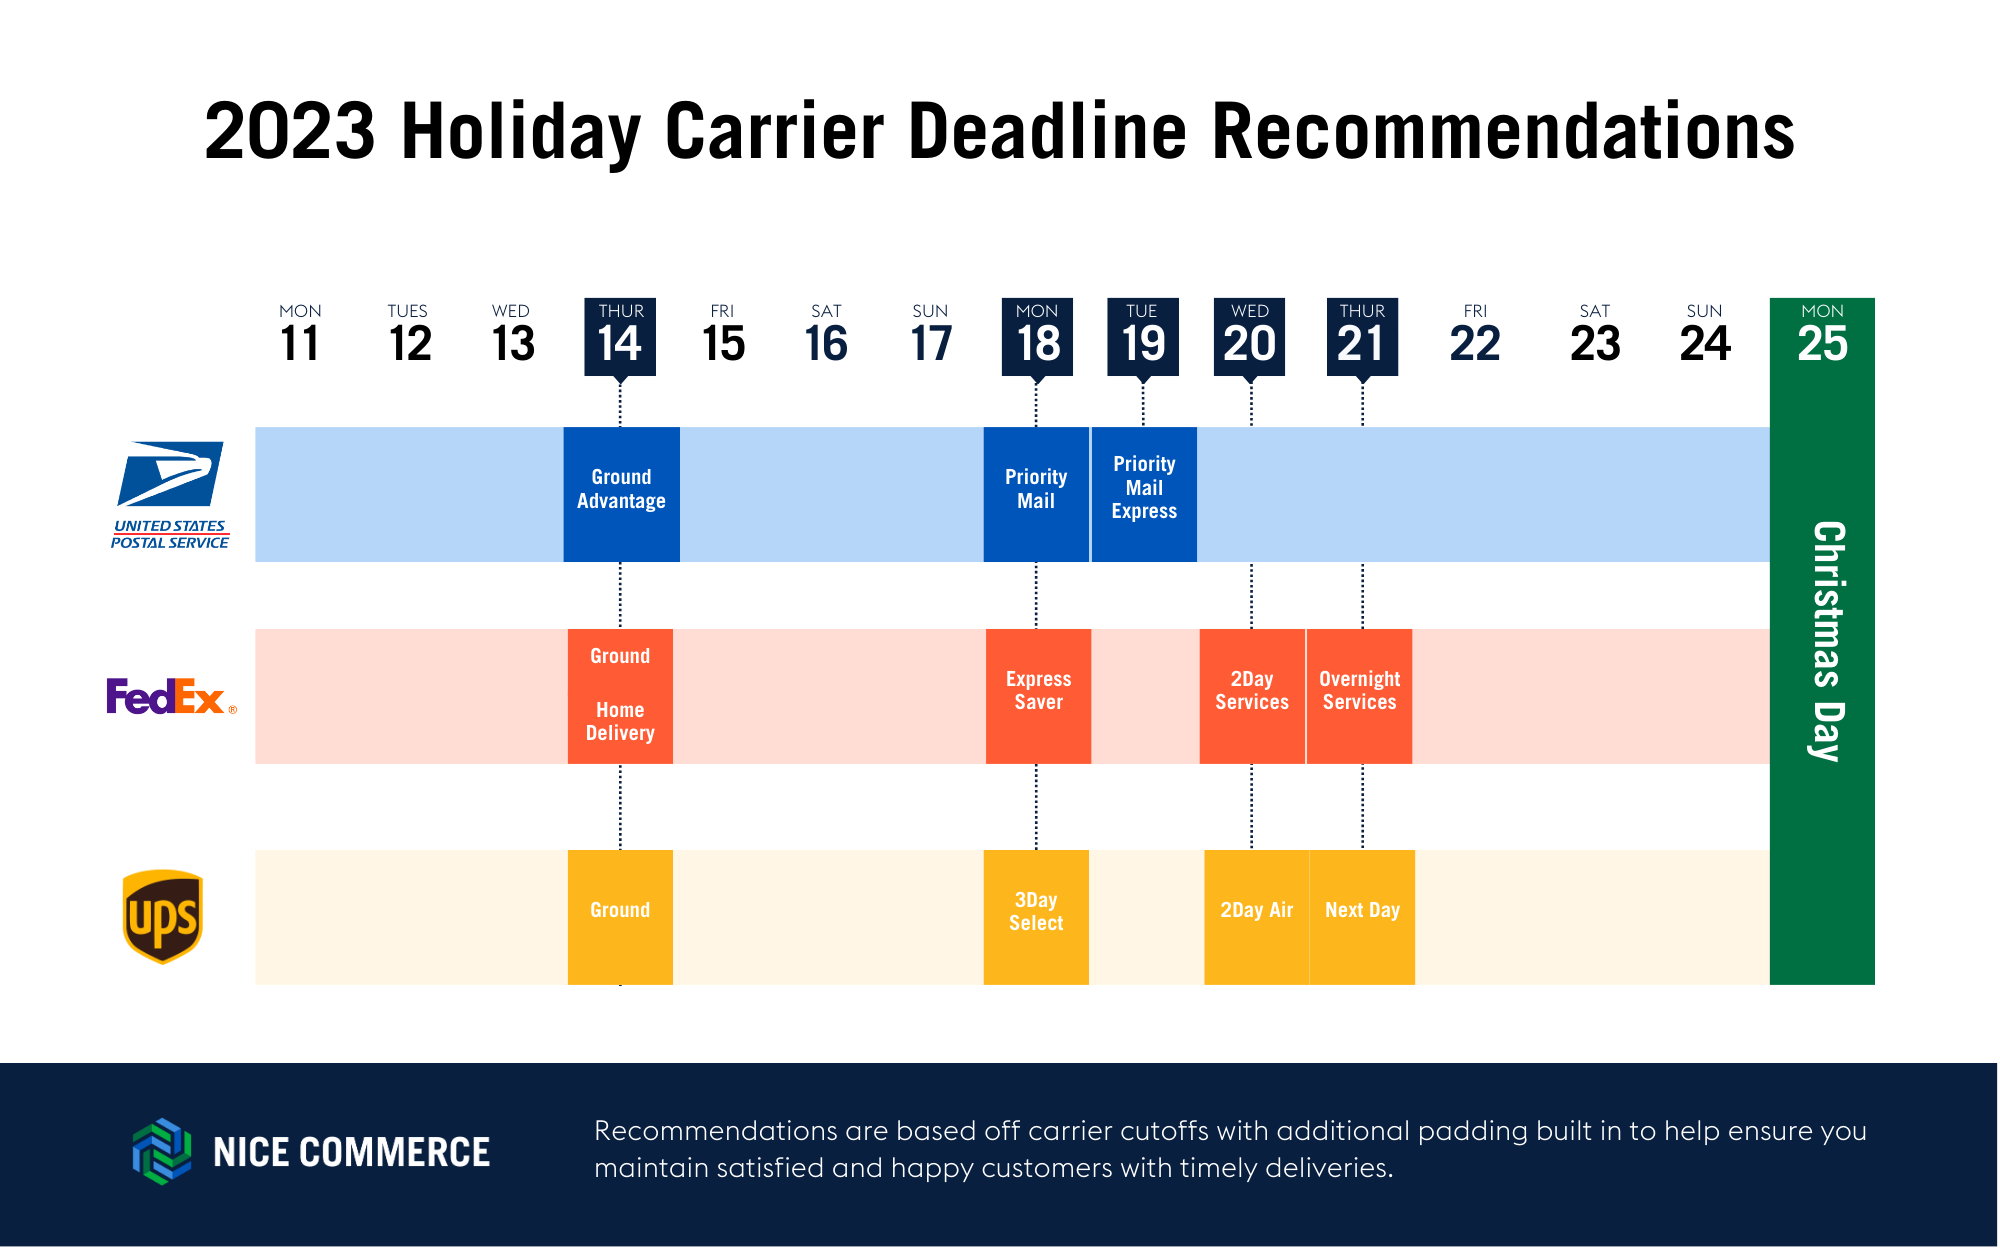 2023 Holiday Shipping Deadlines by Carrier